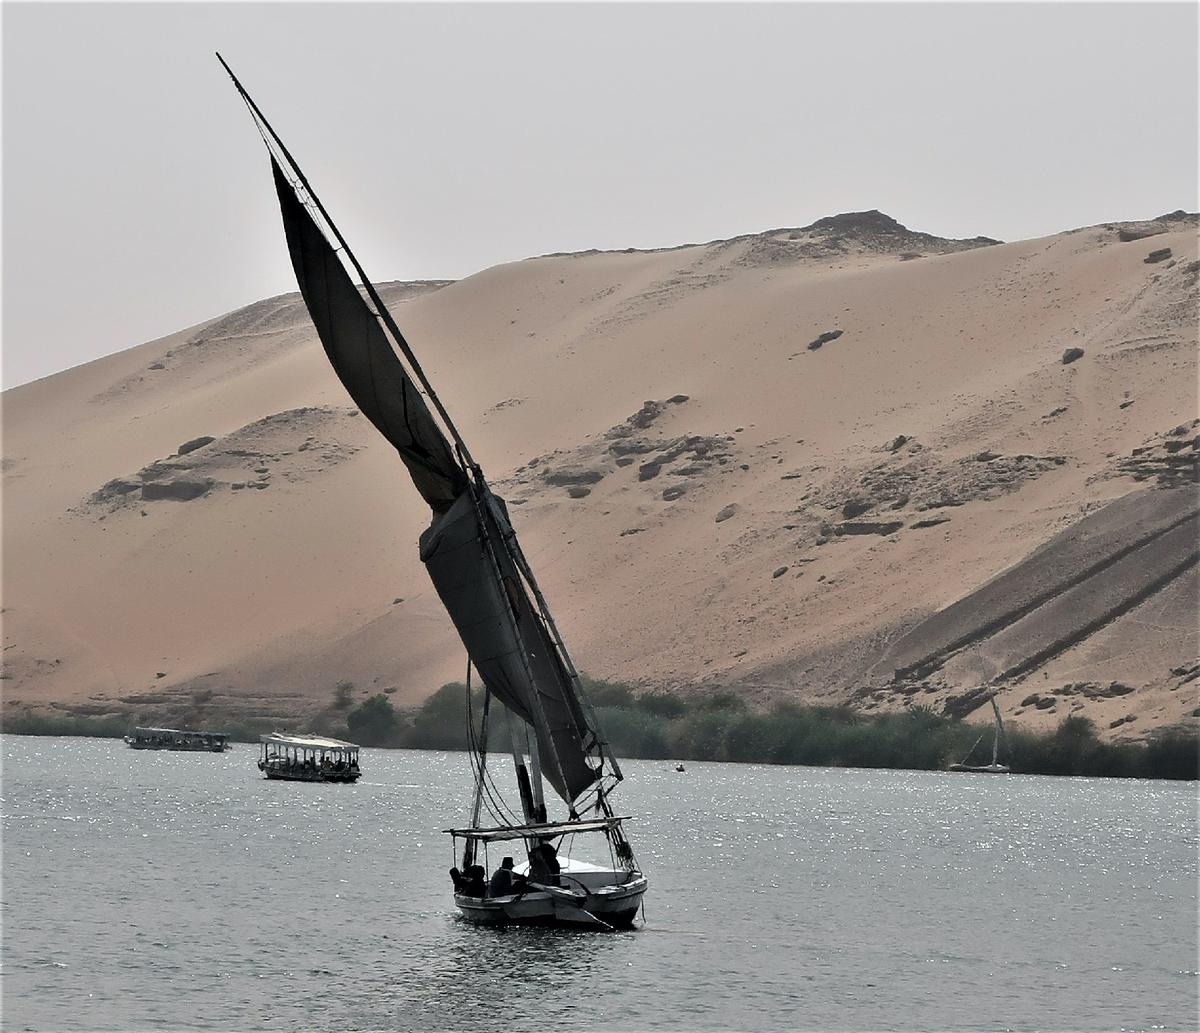 Wooden sailboats called feluccas ply the waters of the Nile River in Egypt. (Victor Block)